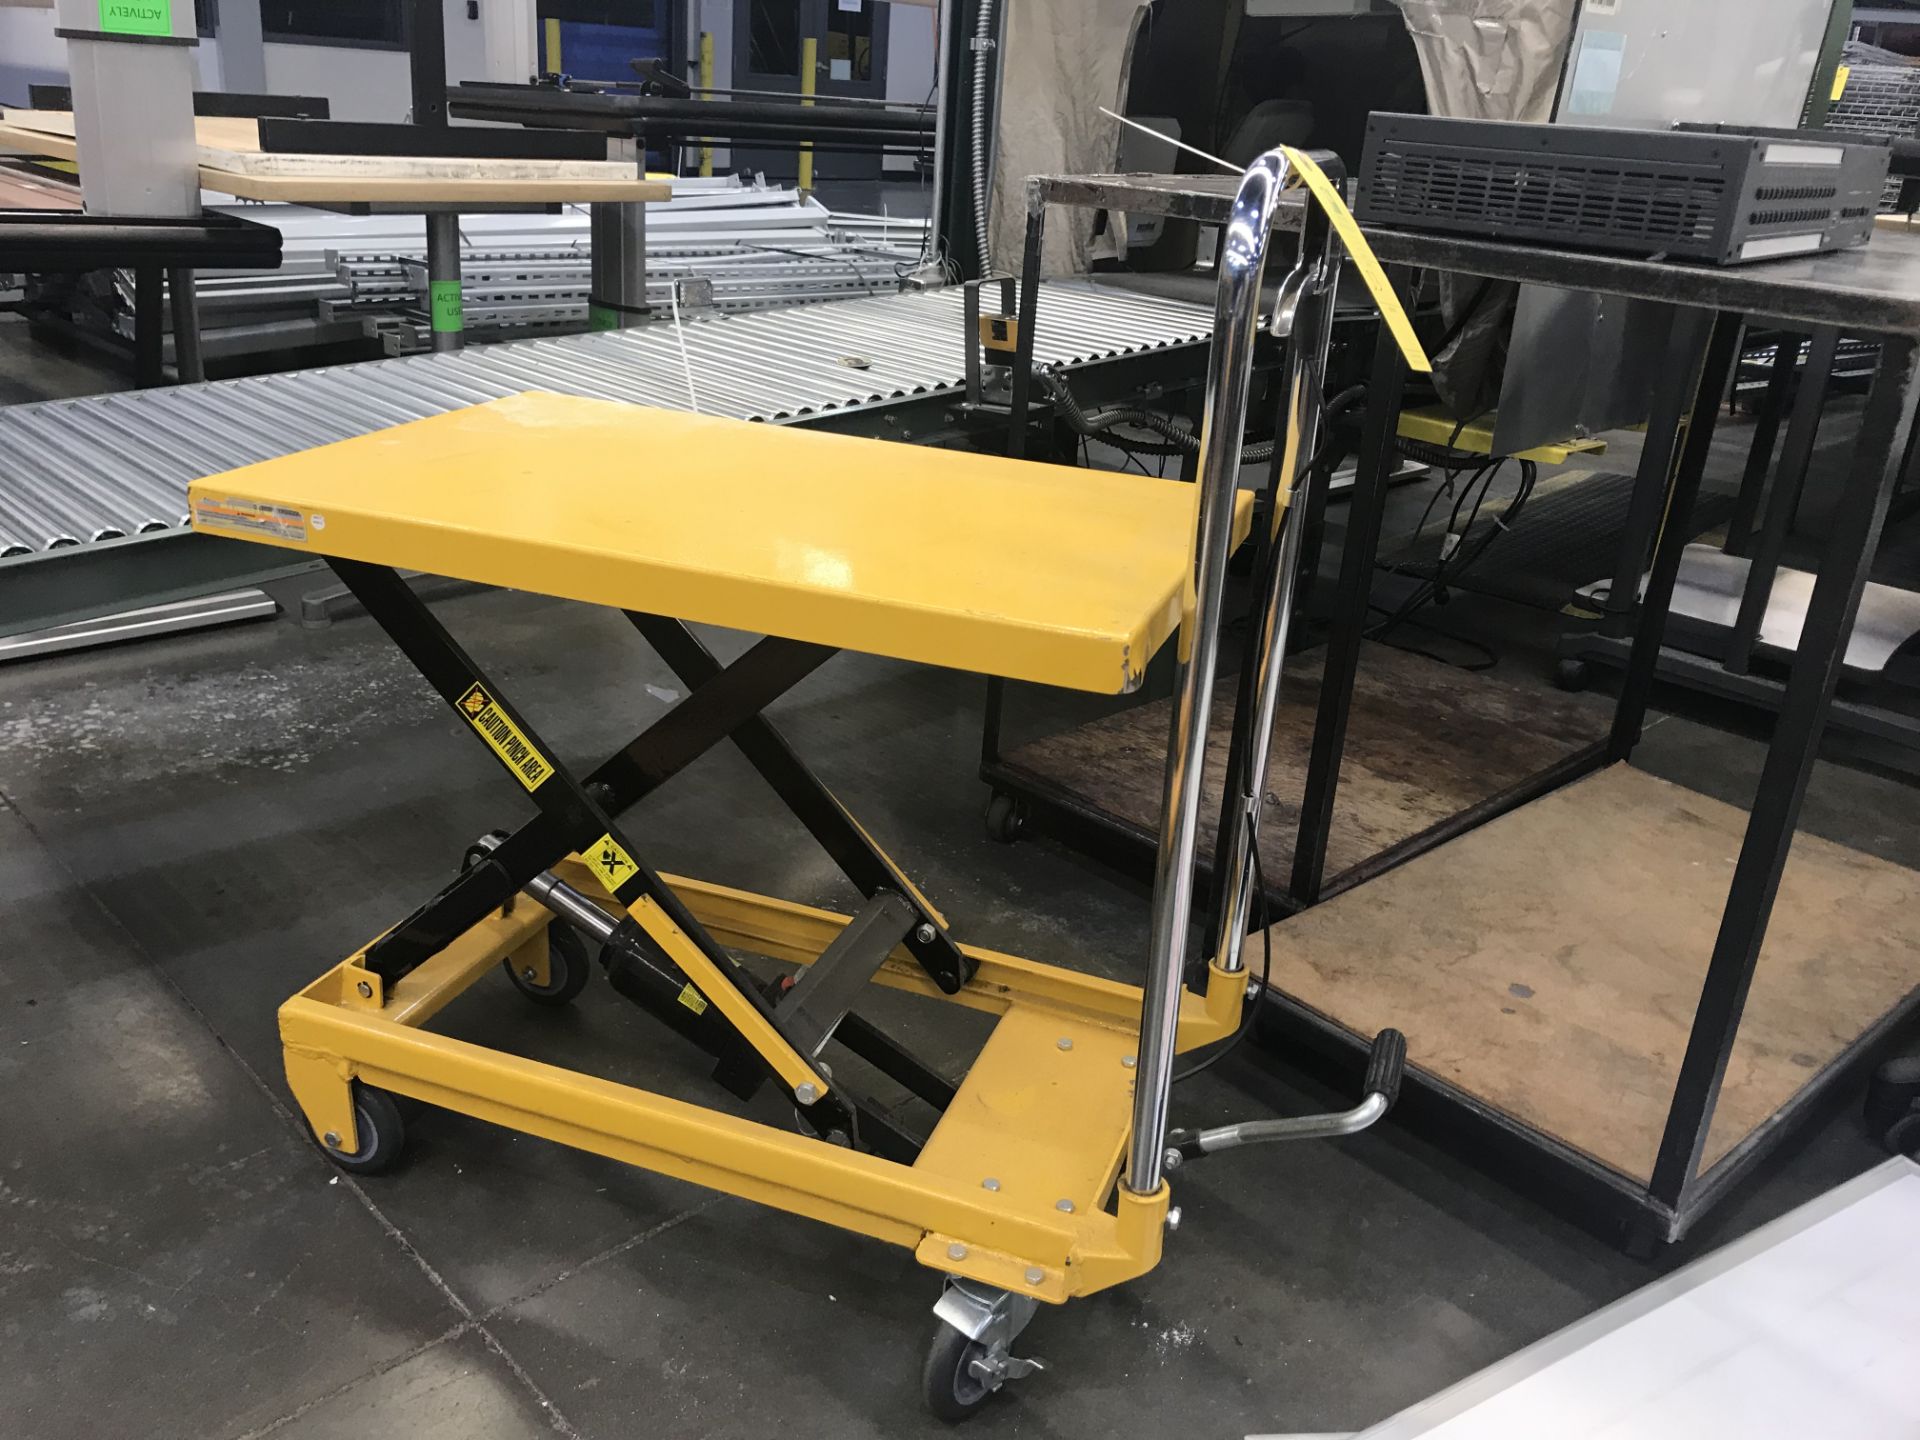 Portable Lift Table, Removal Fee: $20